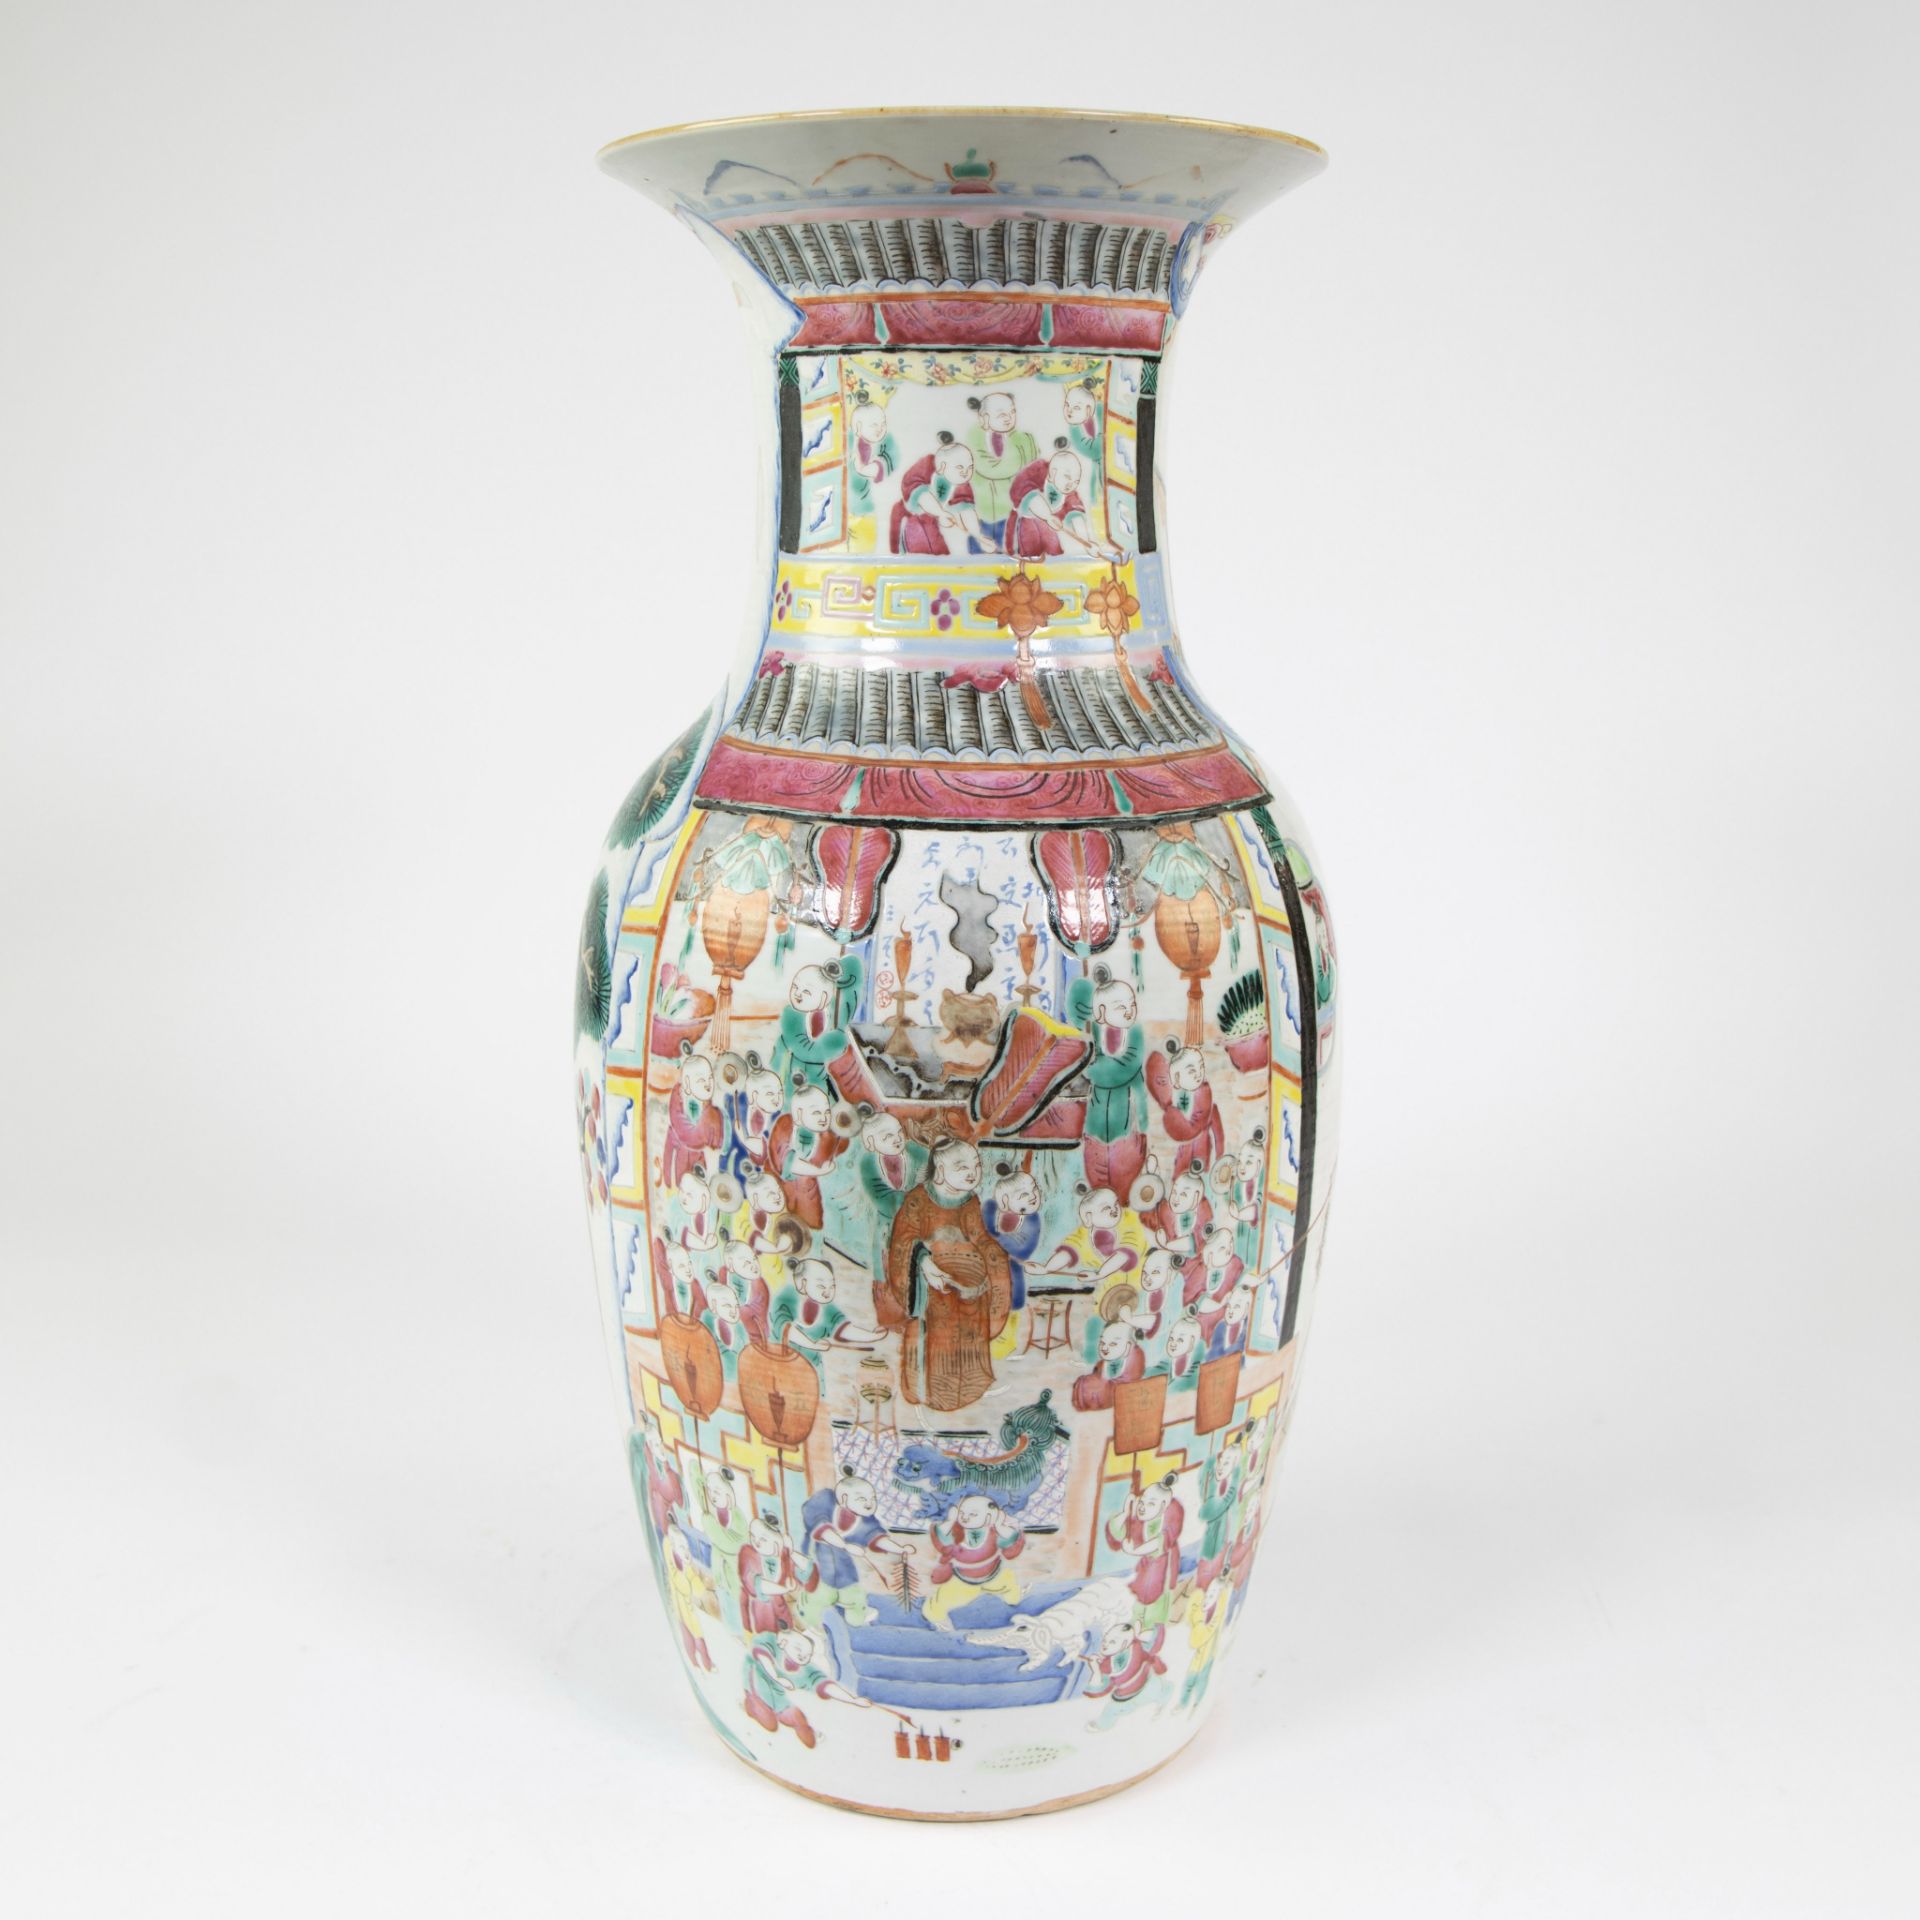 Chinese procelain baluster shaped vase decorated in famille rose enamels with 100 lucky boys theme. 